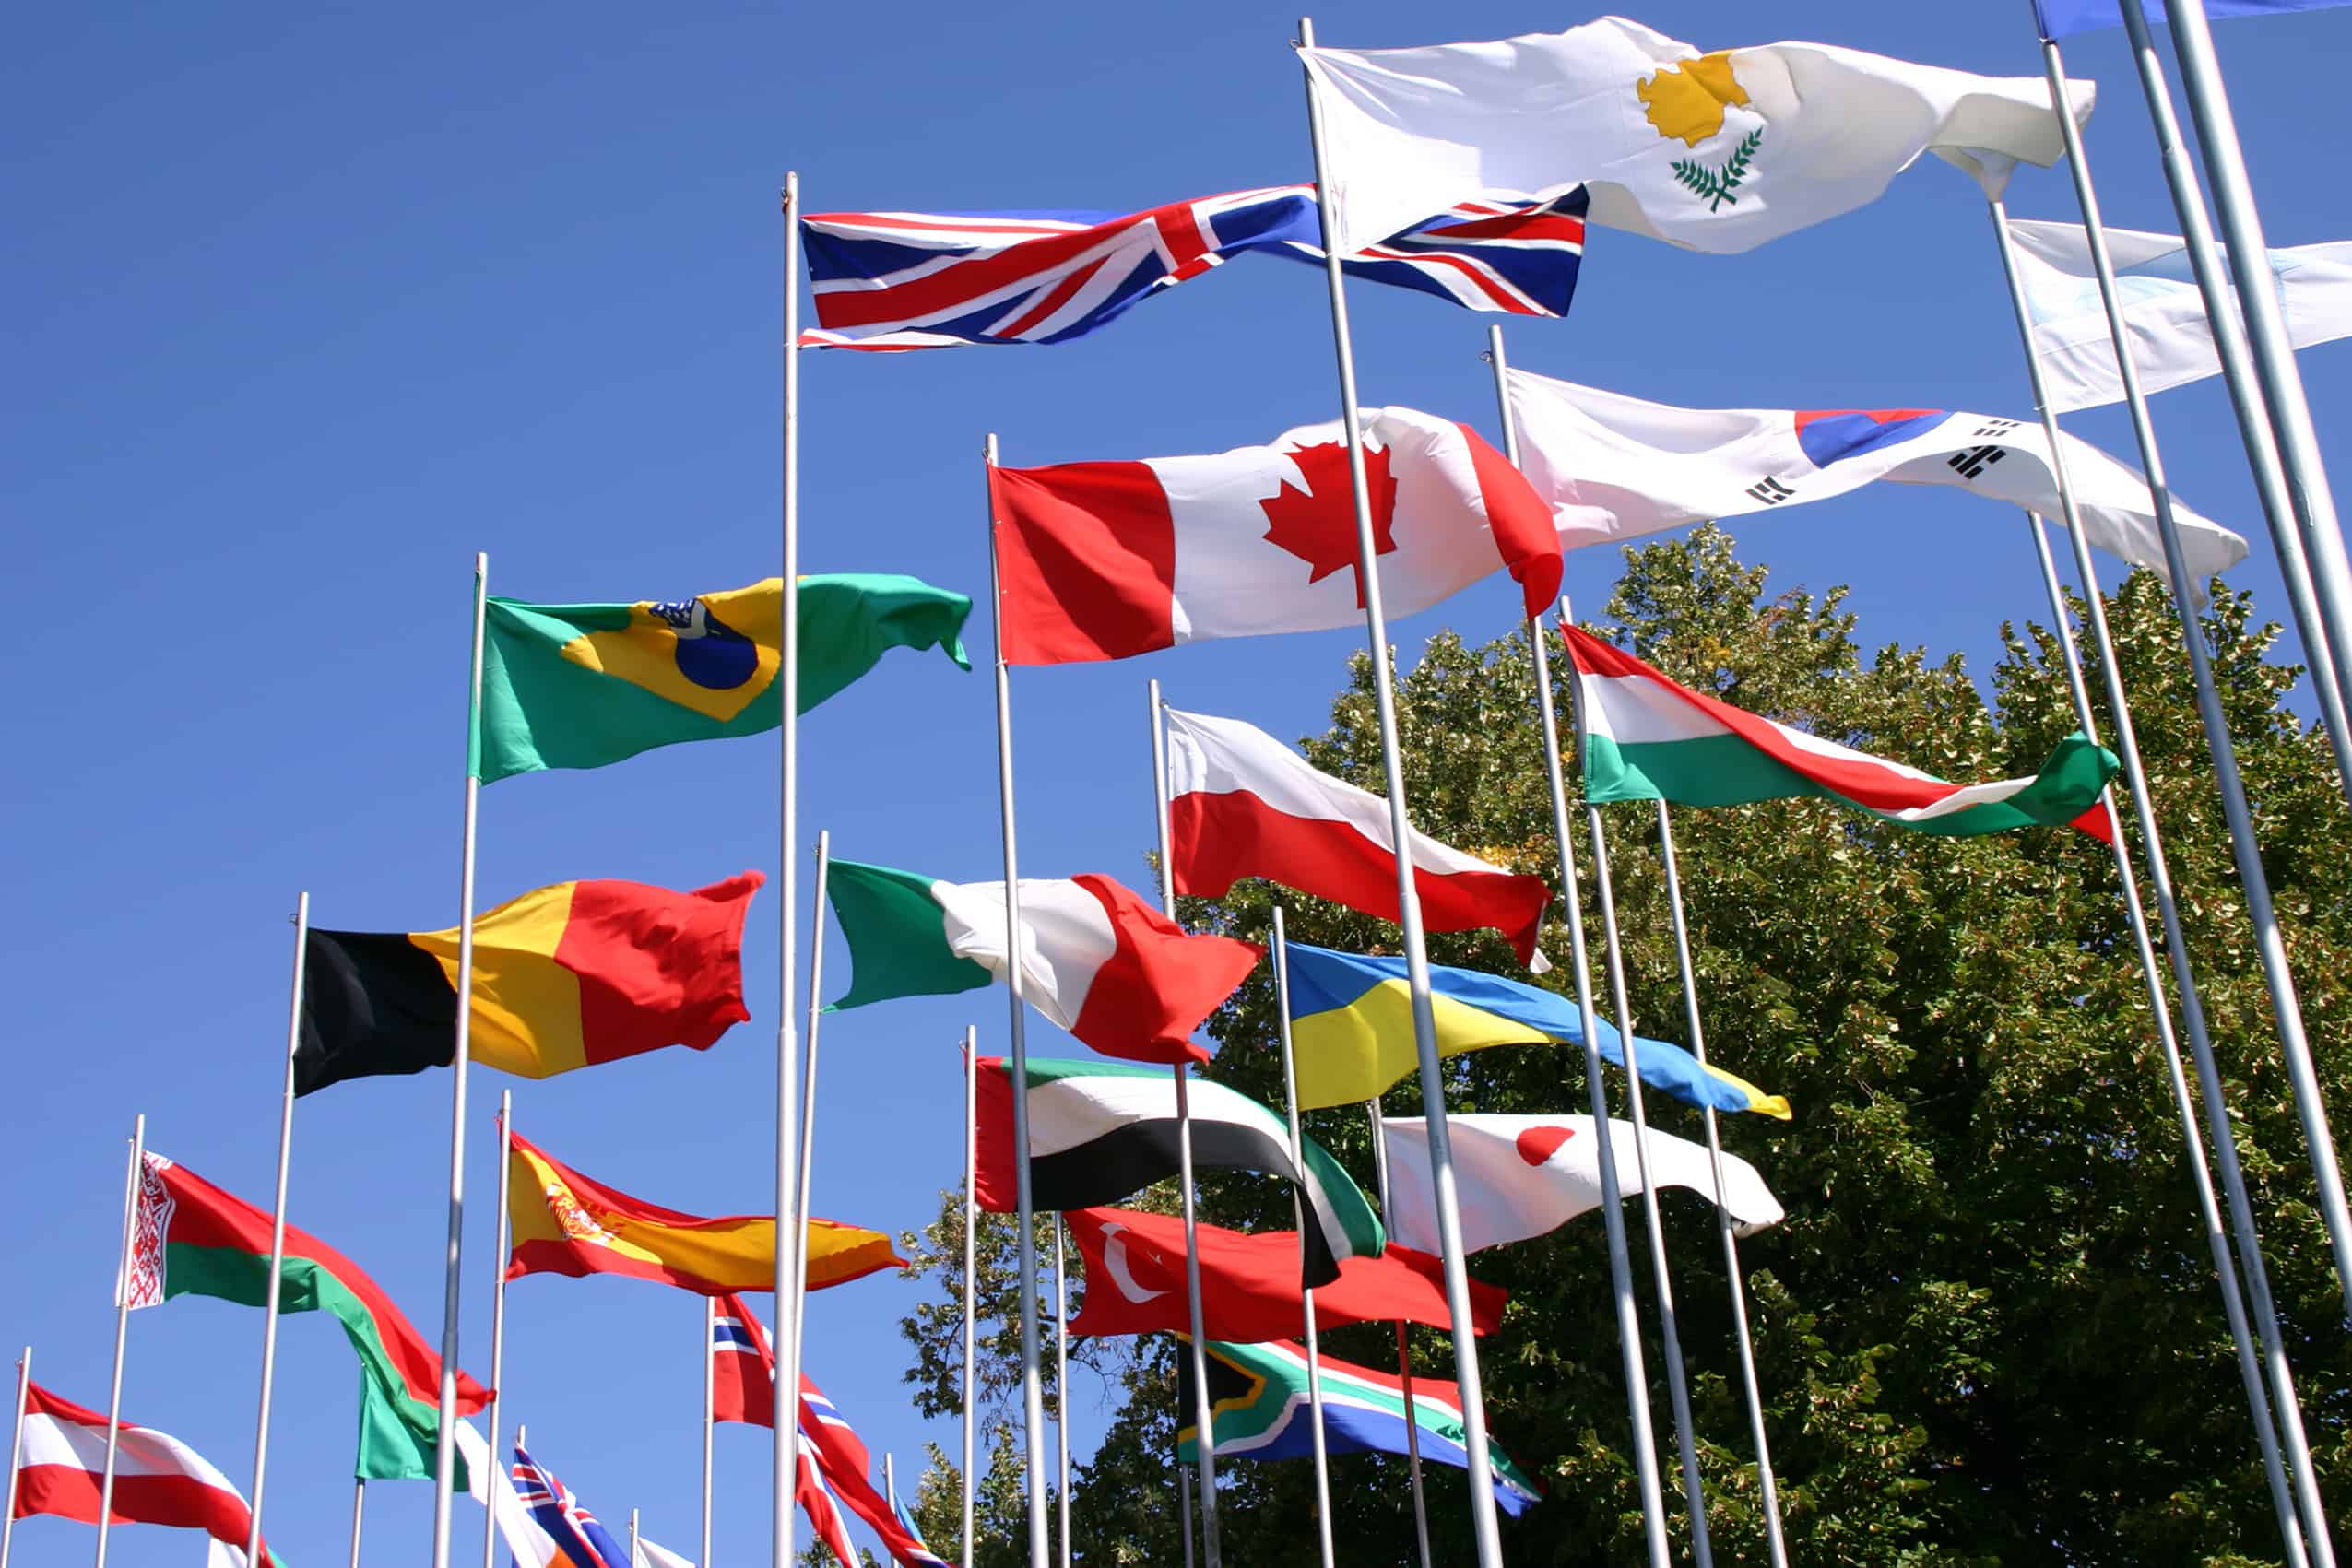 The flags of many different countries, flying in blue sky.